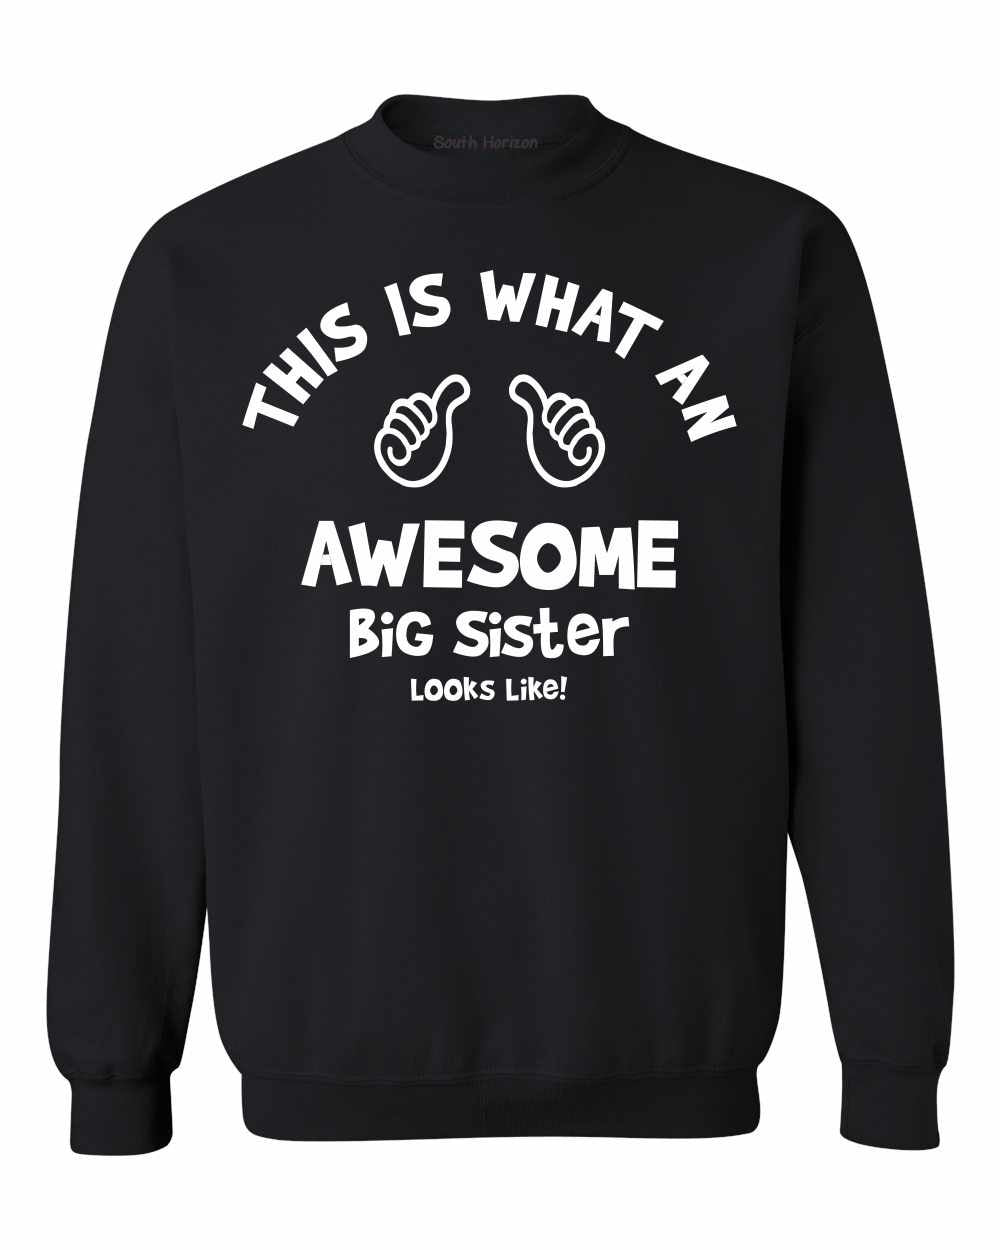 This is What an AWESOME BIG SISTER Looks Like Sweat Shirt (#969-11)